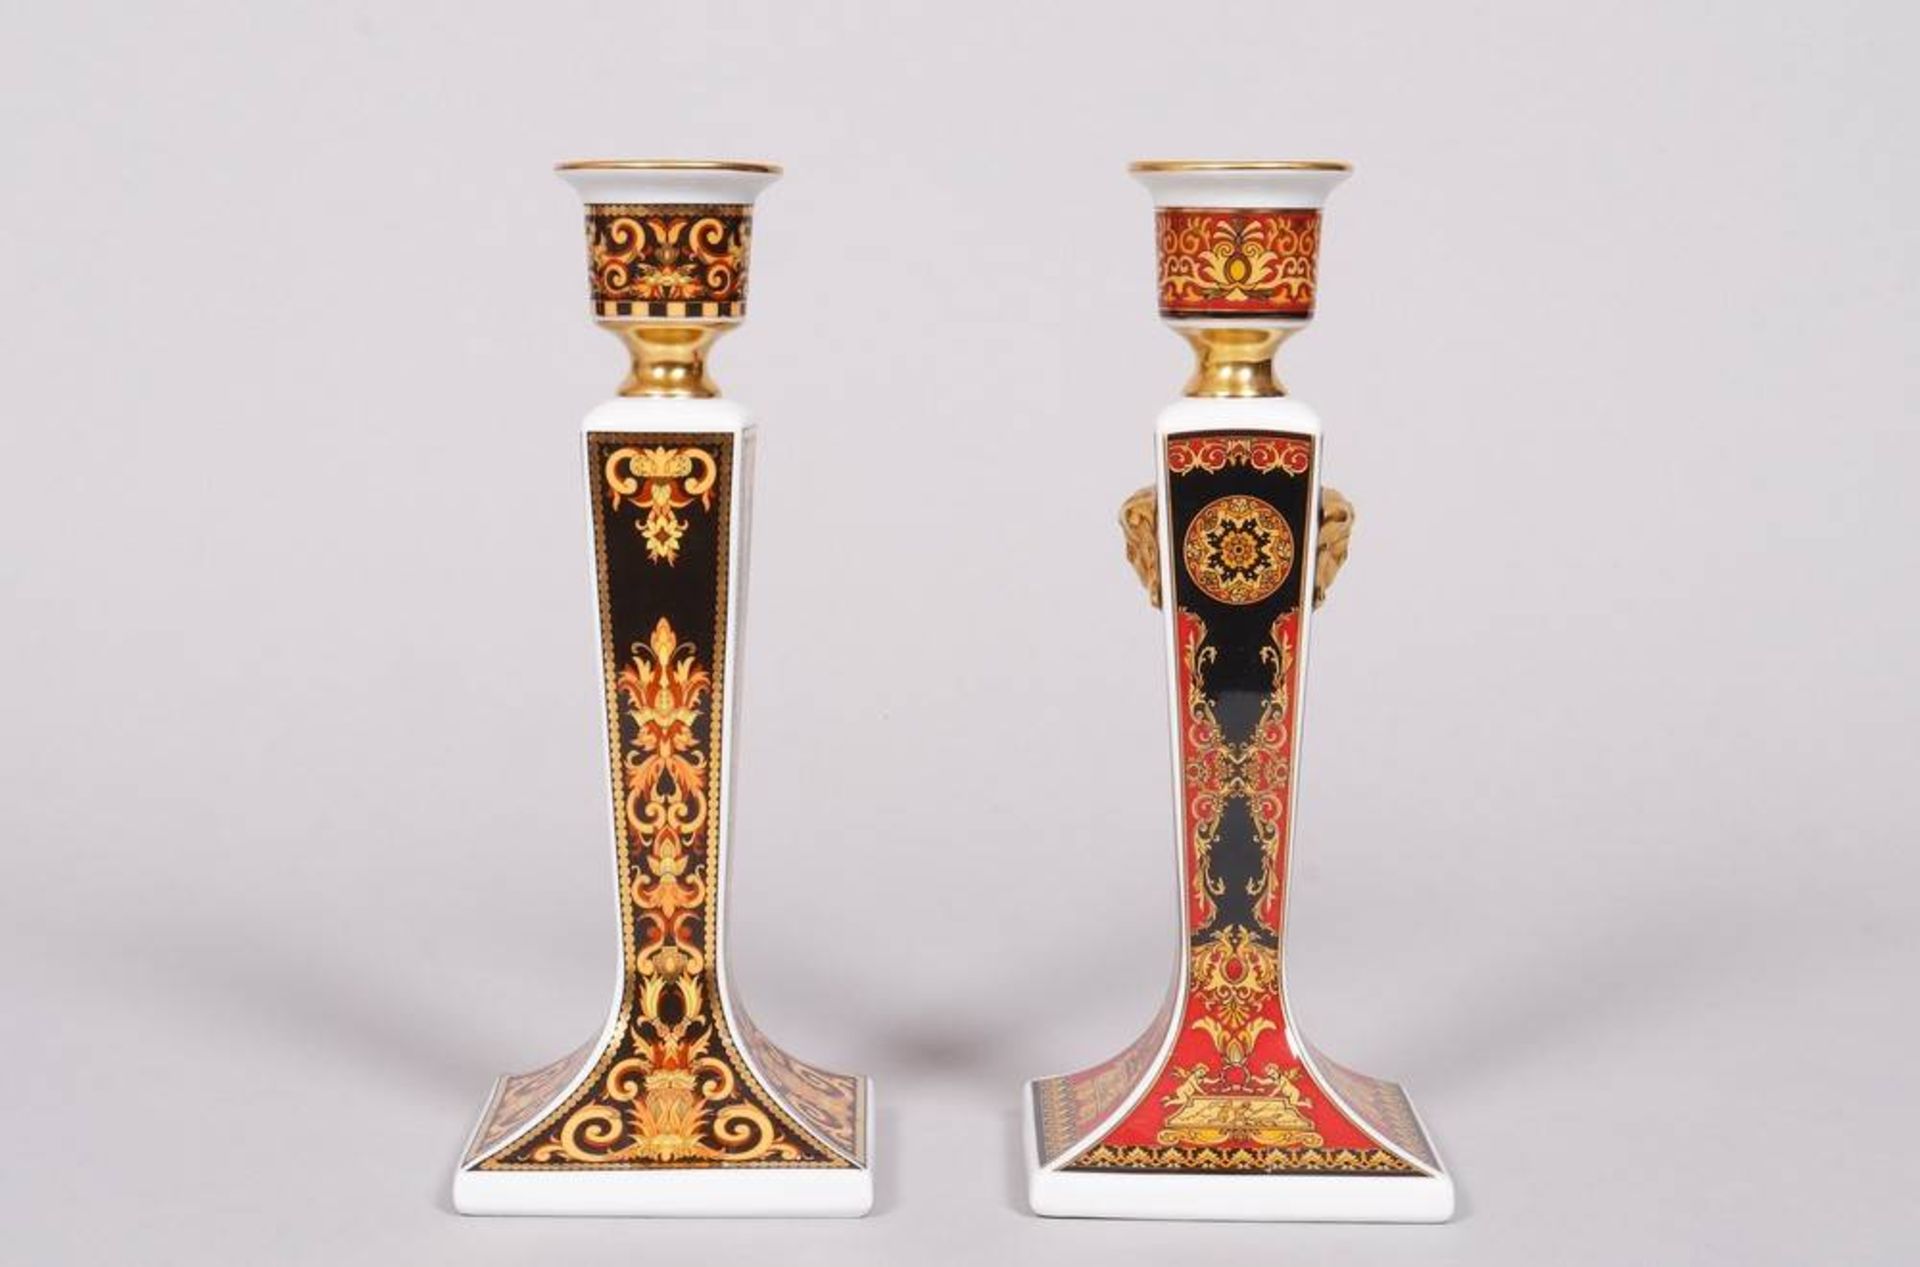 Two candlesticks, Rosenthal meets Versace, form "Mythos" by Paul Wunderlich, decors "Barocco" and " - Image 6 of 9